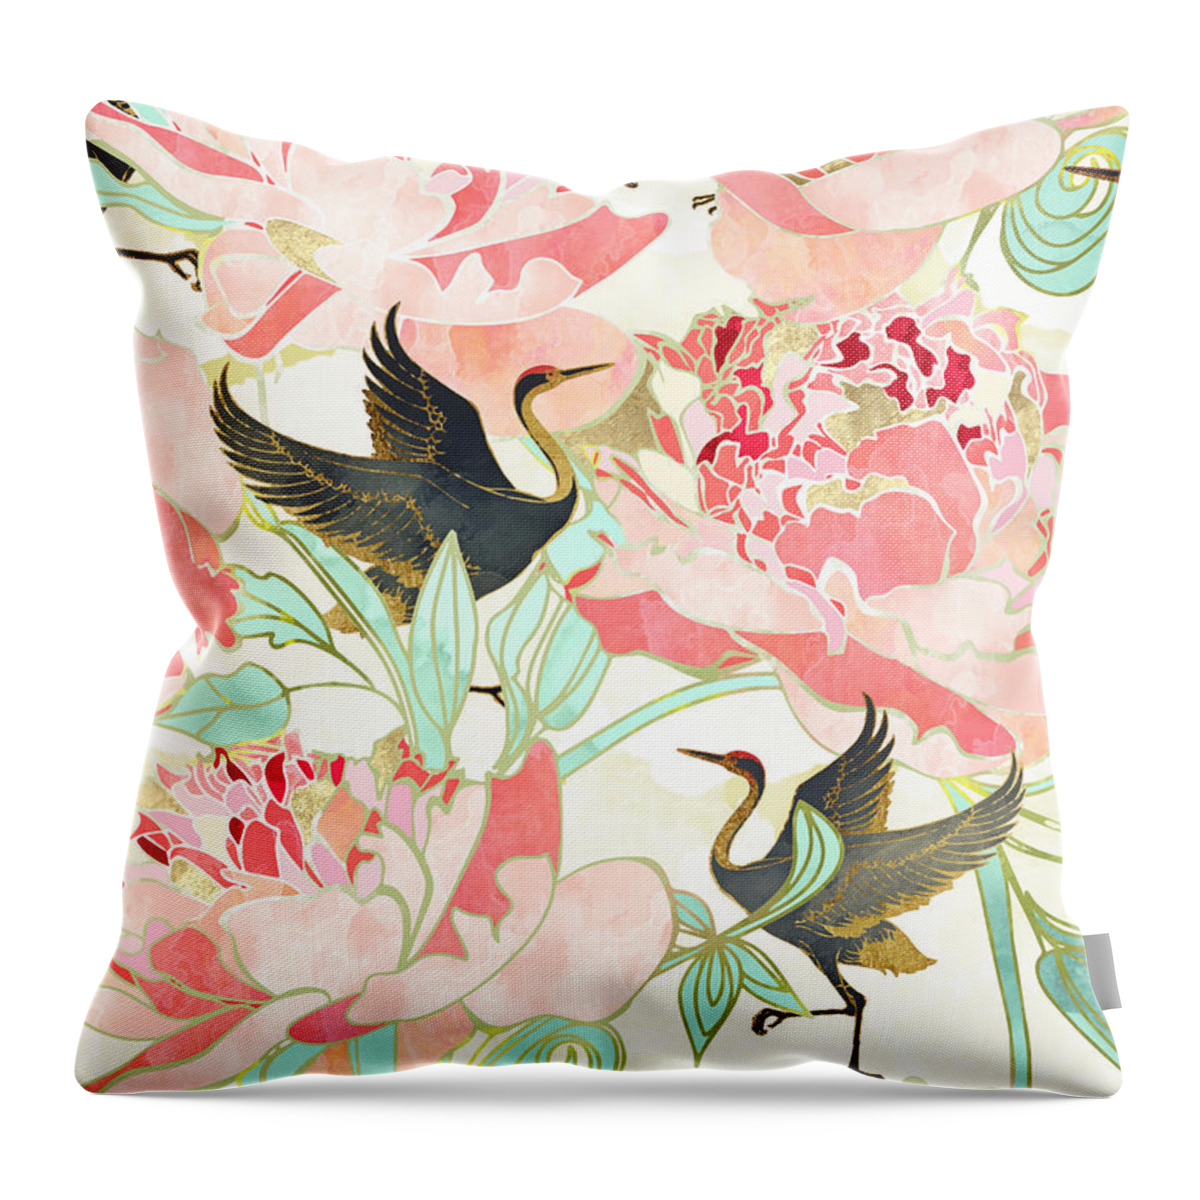 Floral Throw Pillow featuring the digital art Floral Cranes by Spacefrog Designs